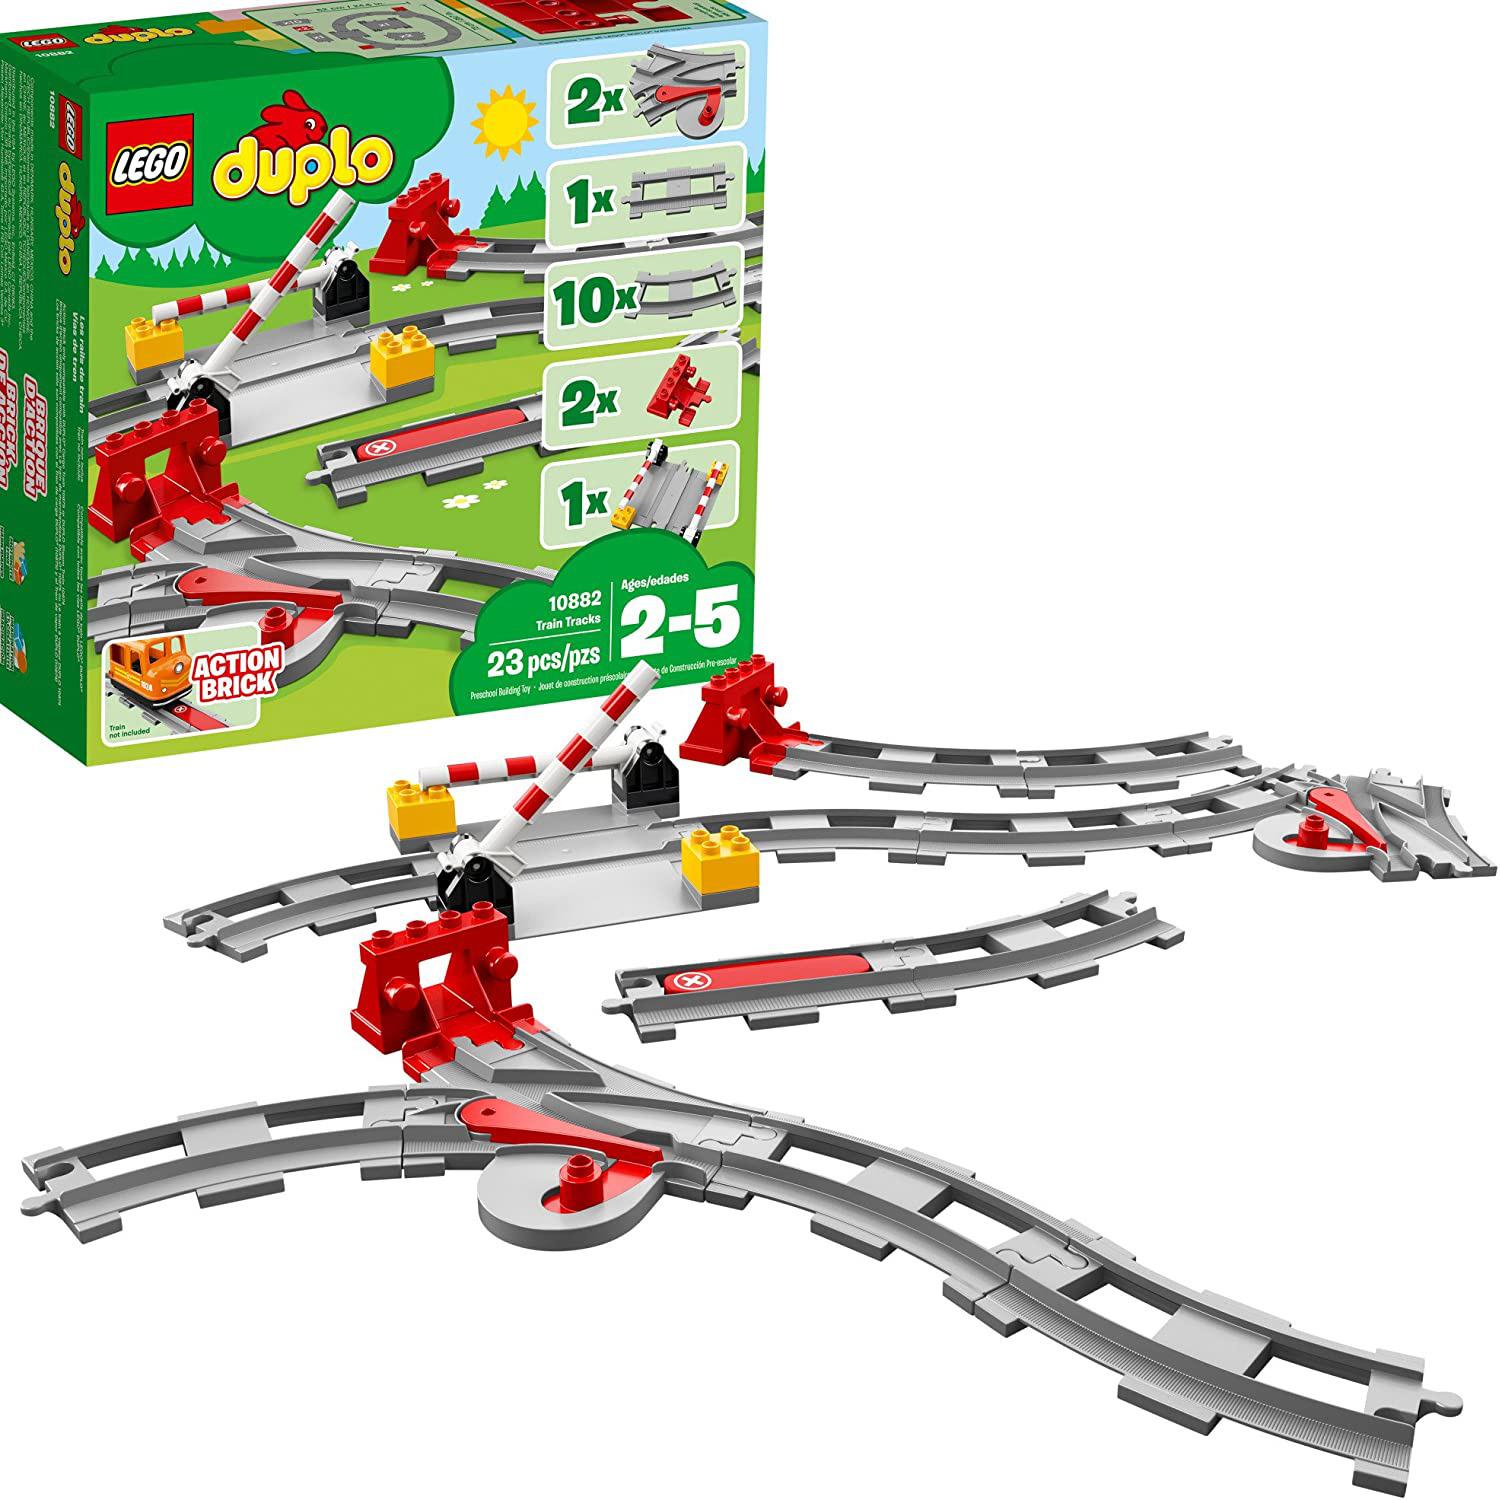 Lego Duplo Town Train Tracks for $9.99